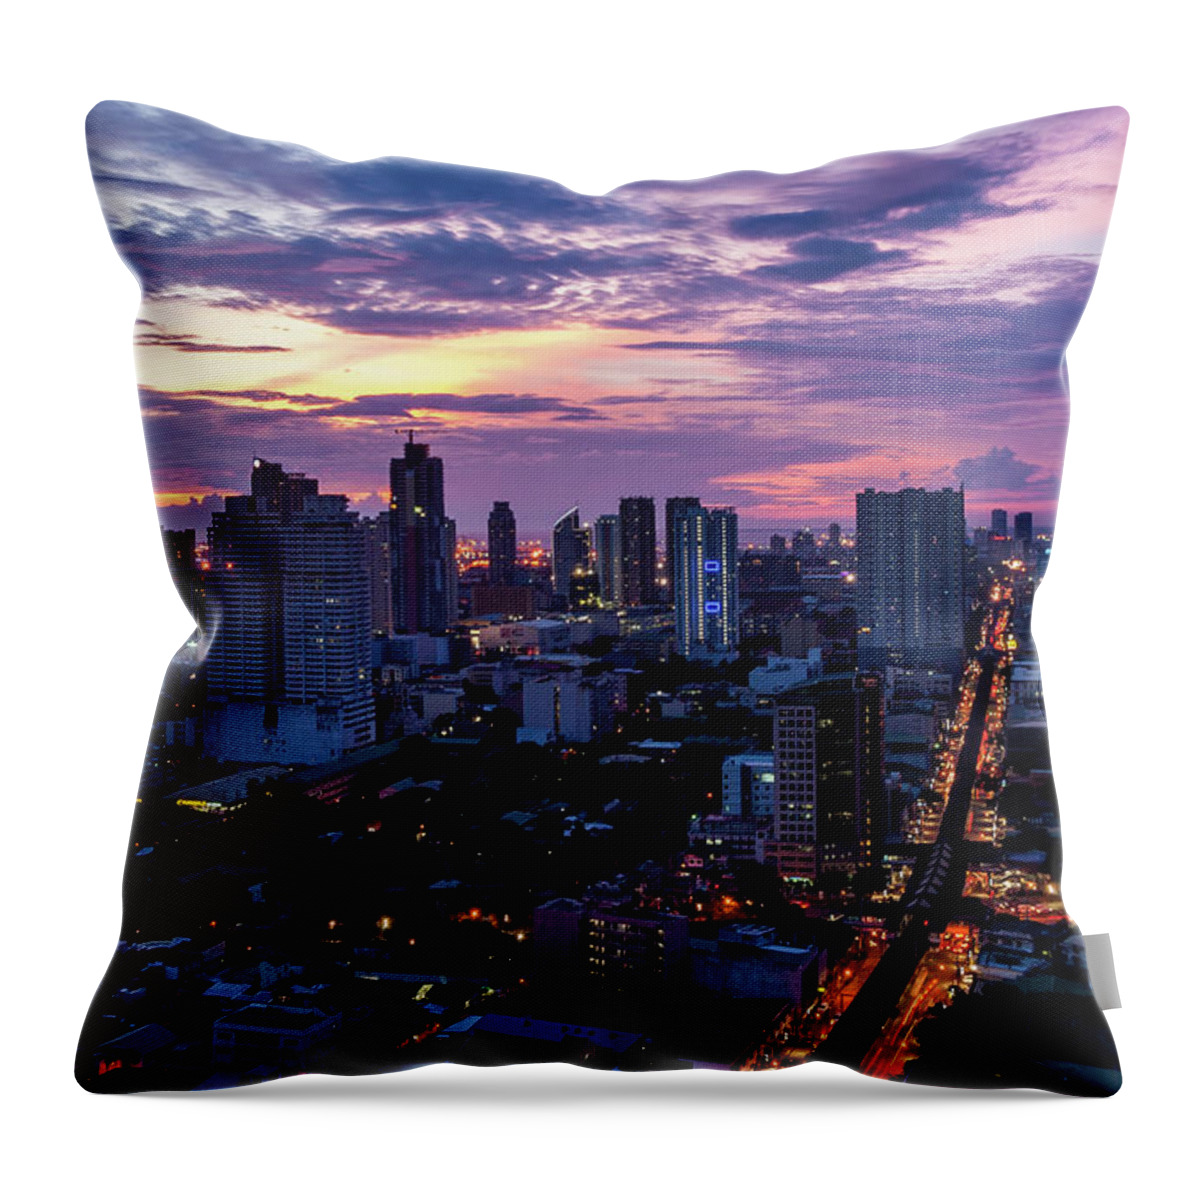 Philippines Throw Pillow featuring the photograph Manla Cityscape by Arj Munoz